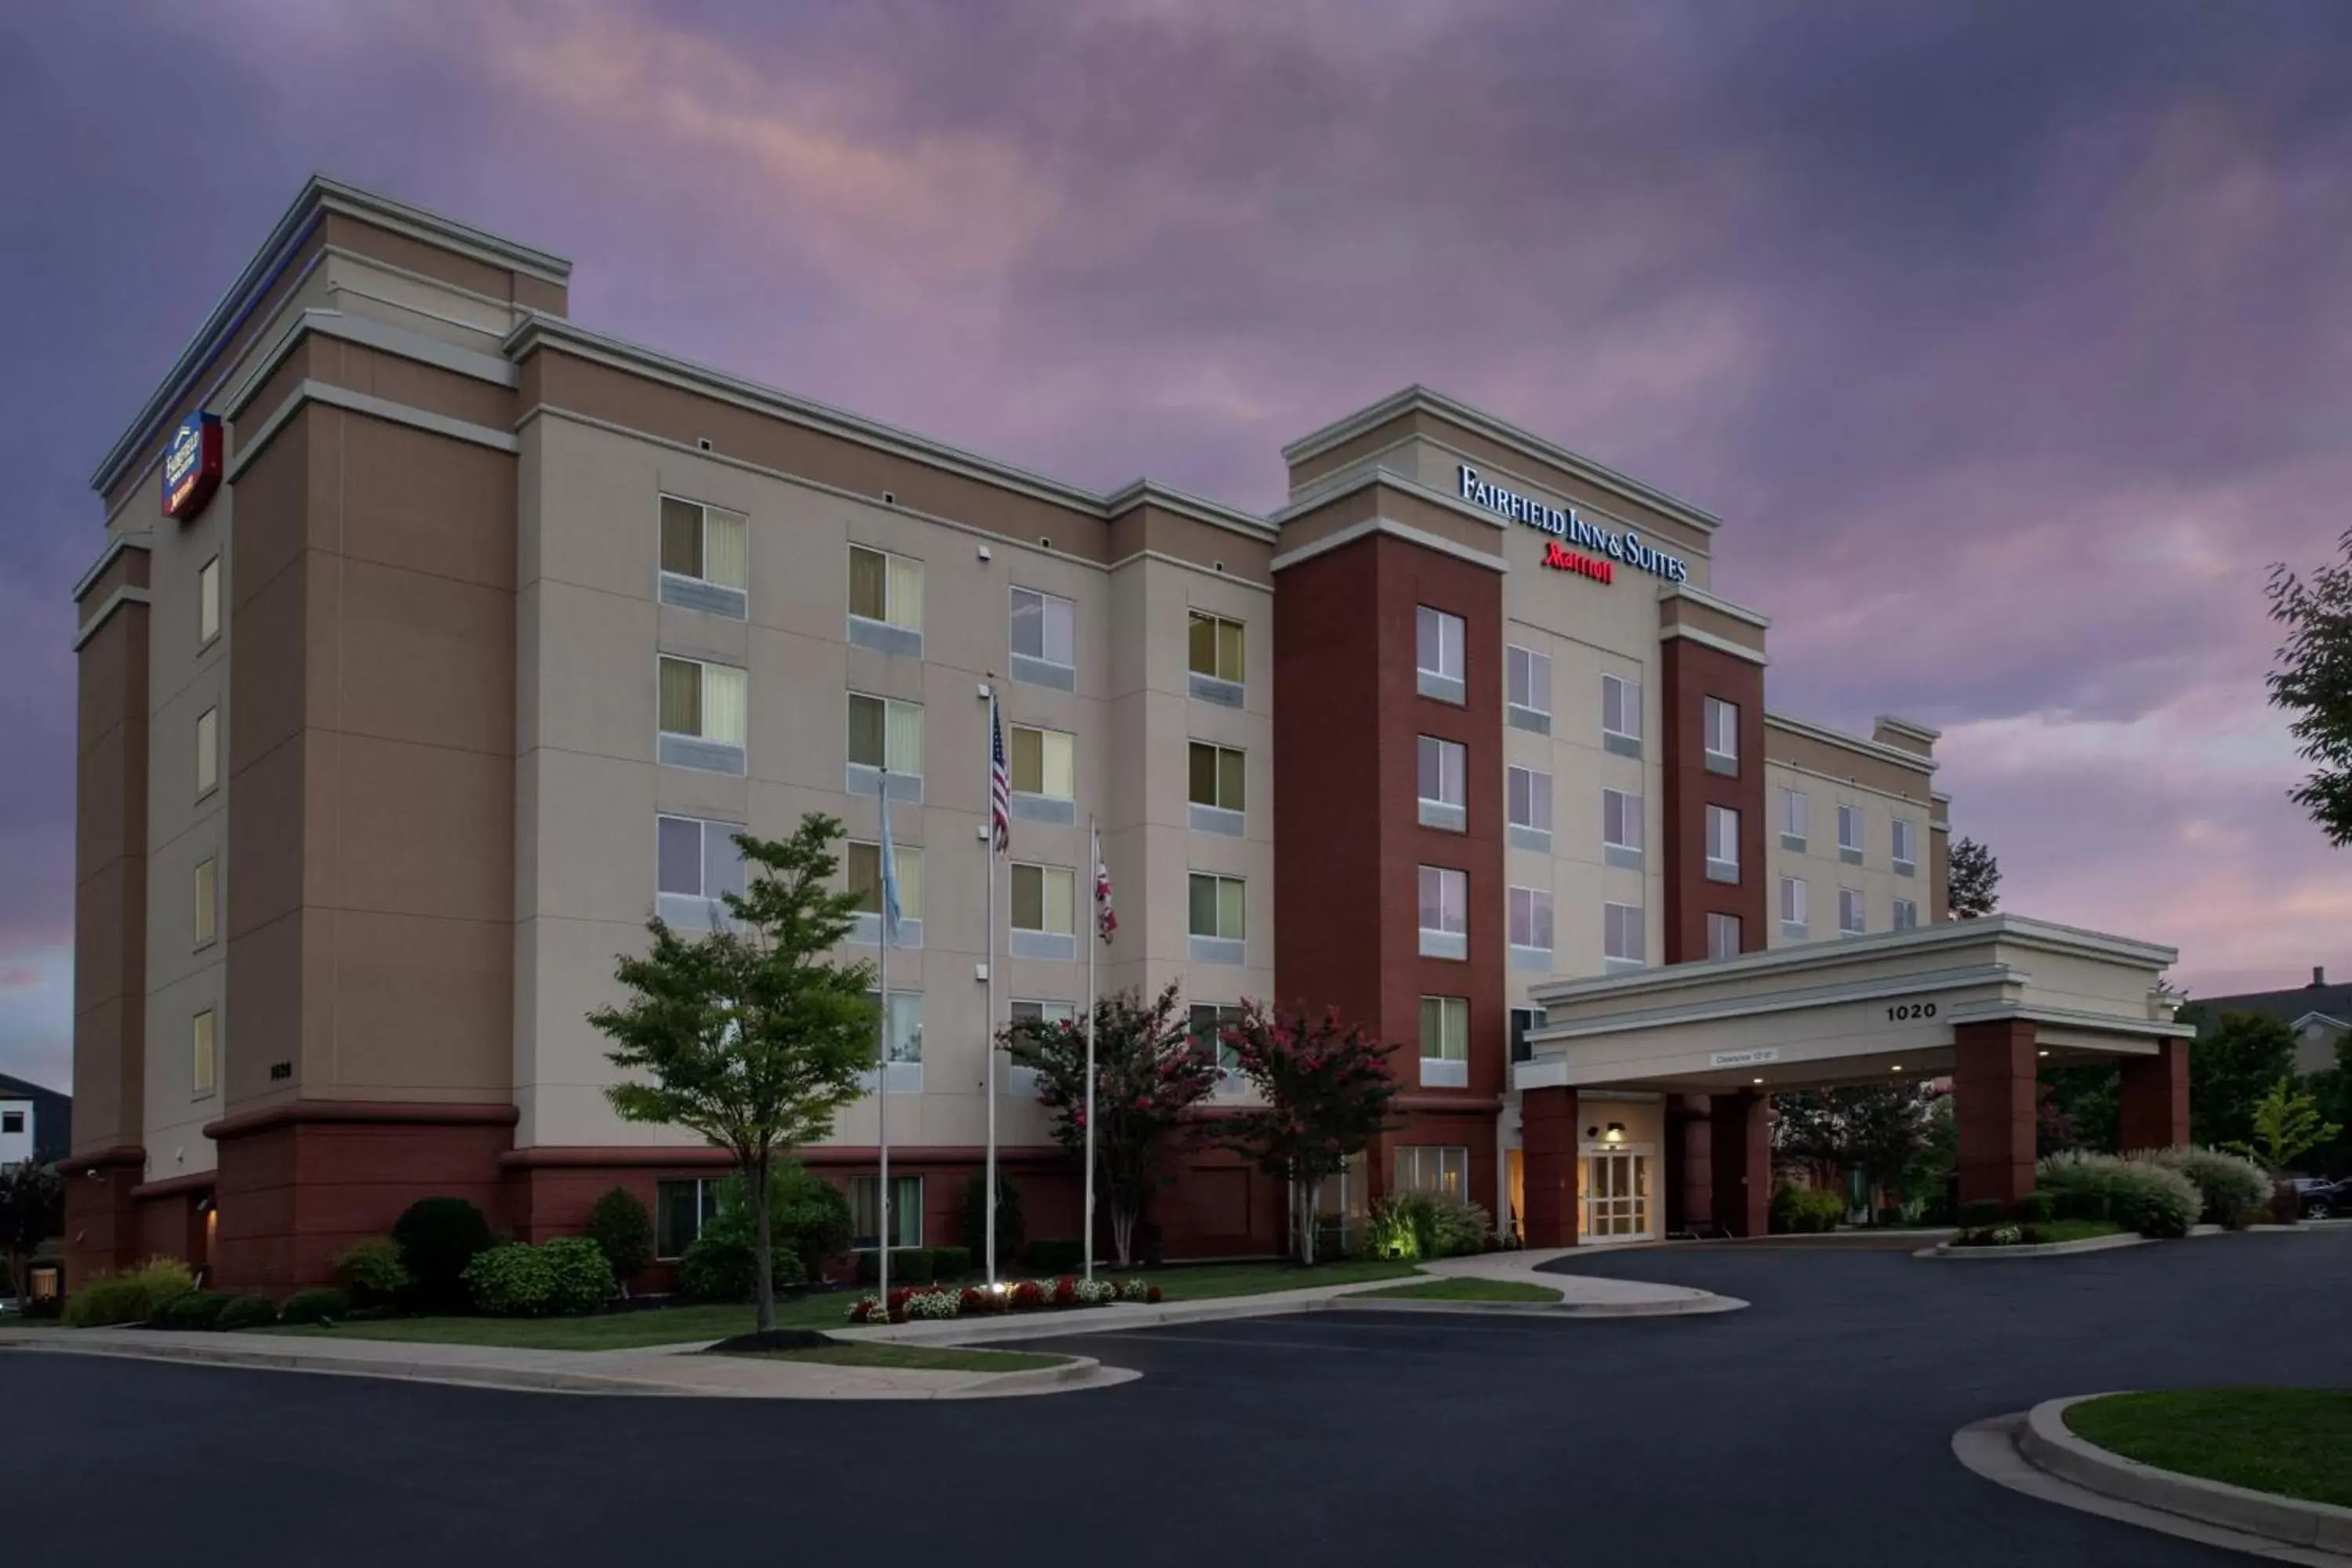 Property Building in Fairfield Inn & Suites Baltimore BWI Airport